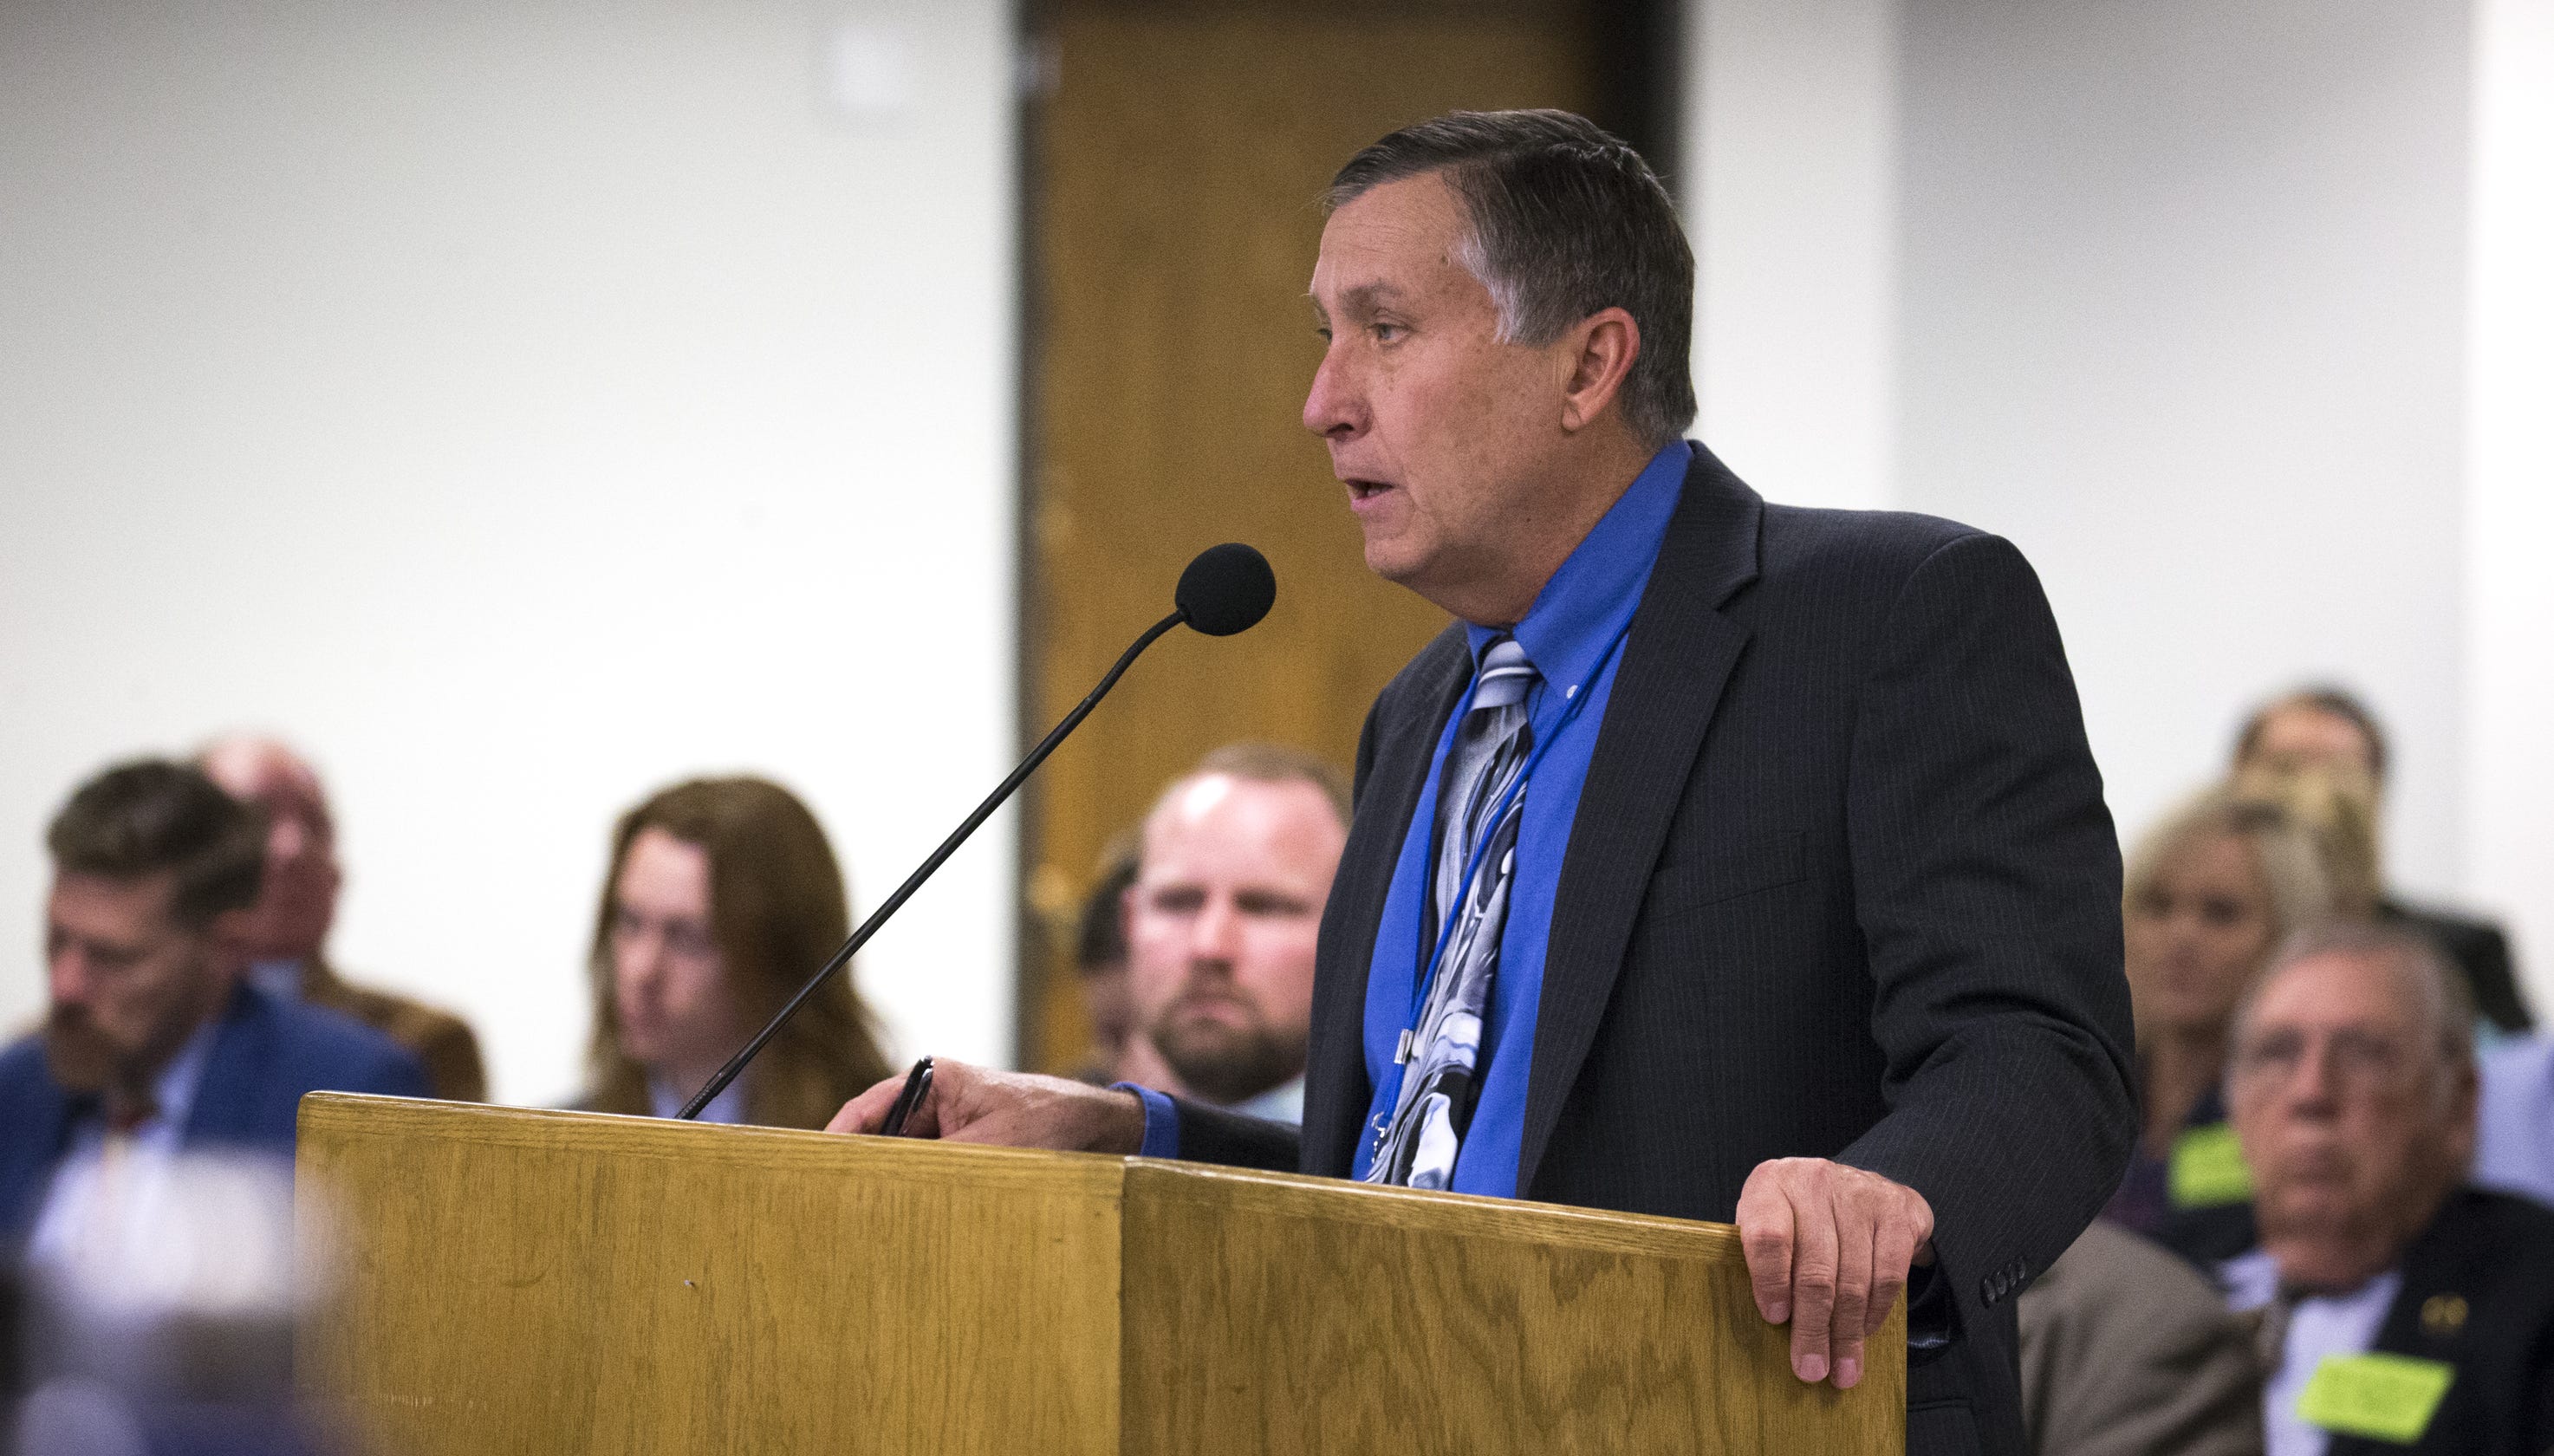 Tensions emerge as a top Arizona official discusses tribes’ unresolved water claims - AZCentral